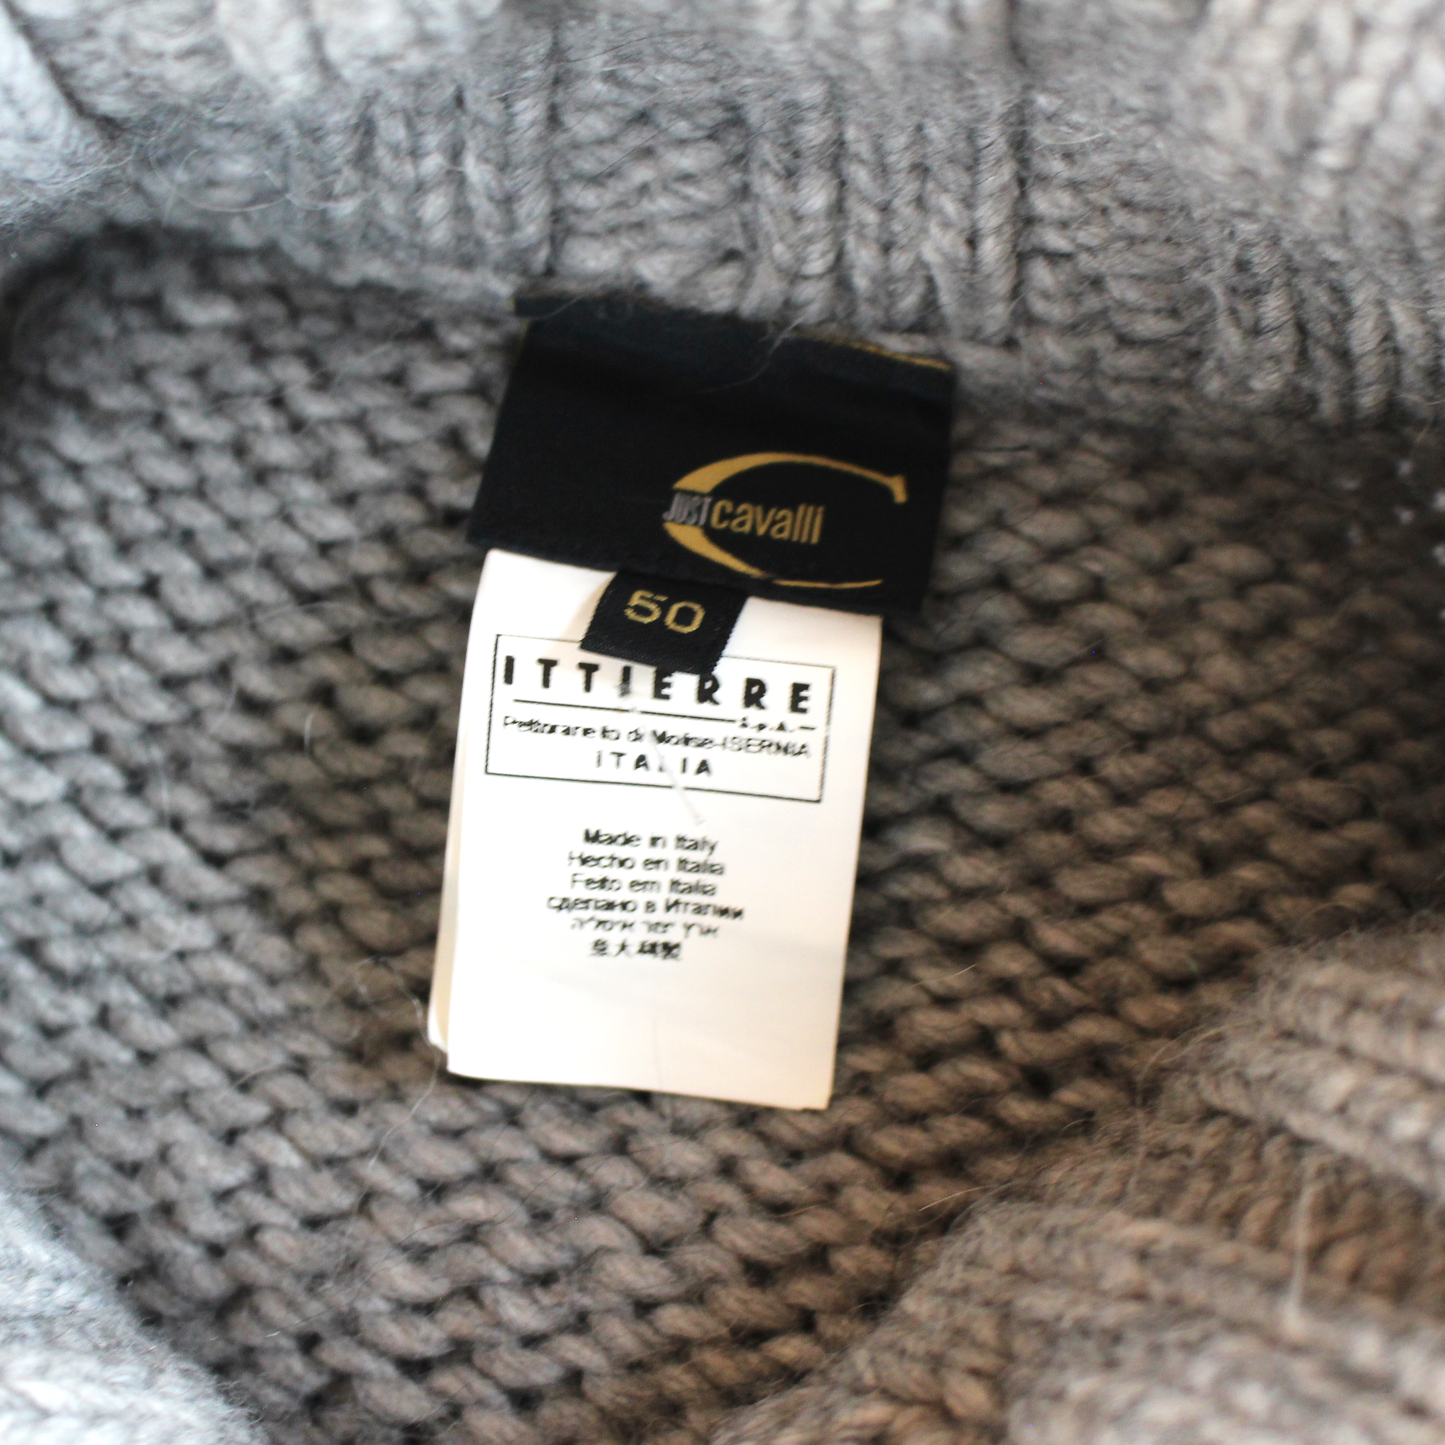 Just Cavalli Cable Knit Cardigan